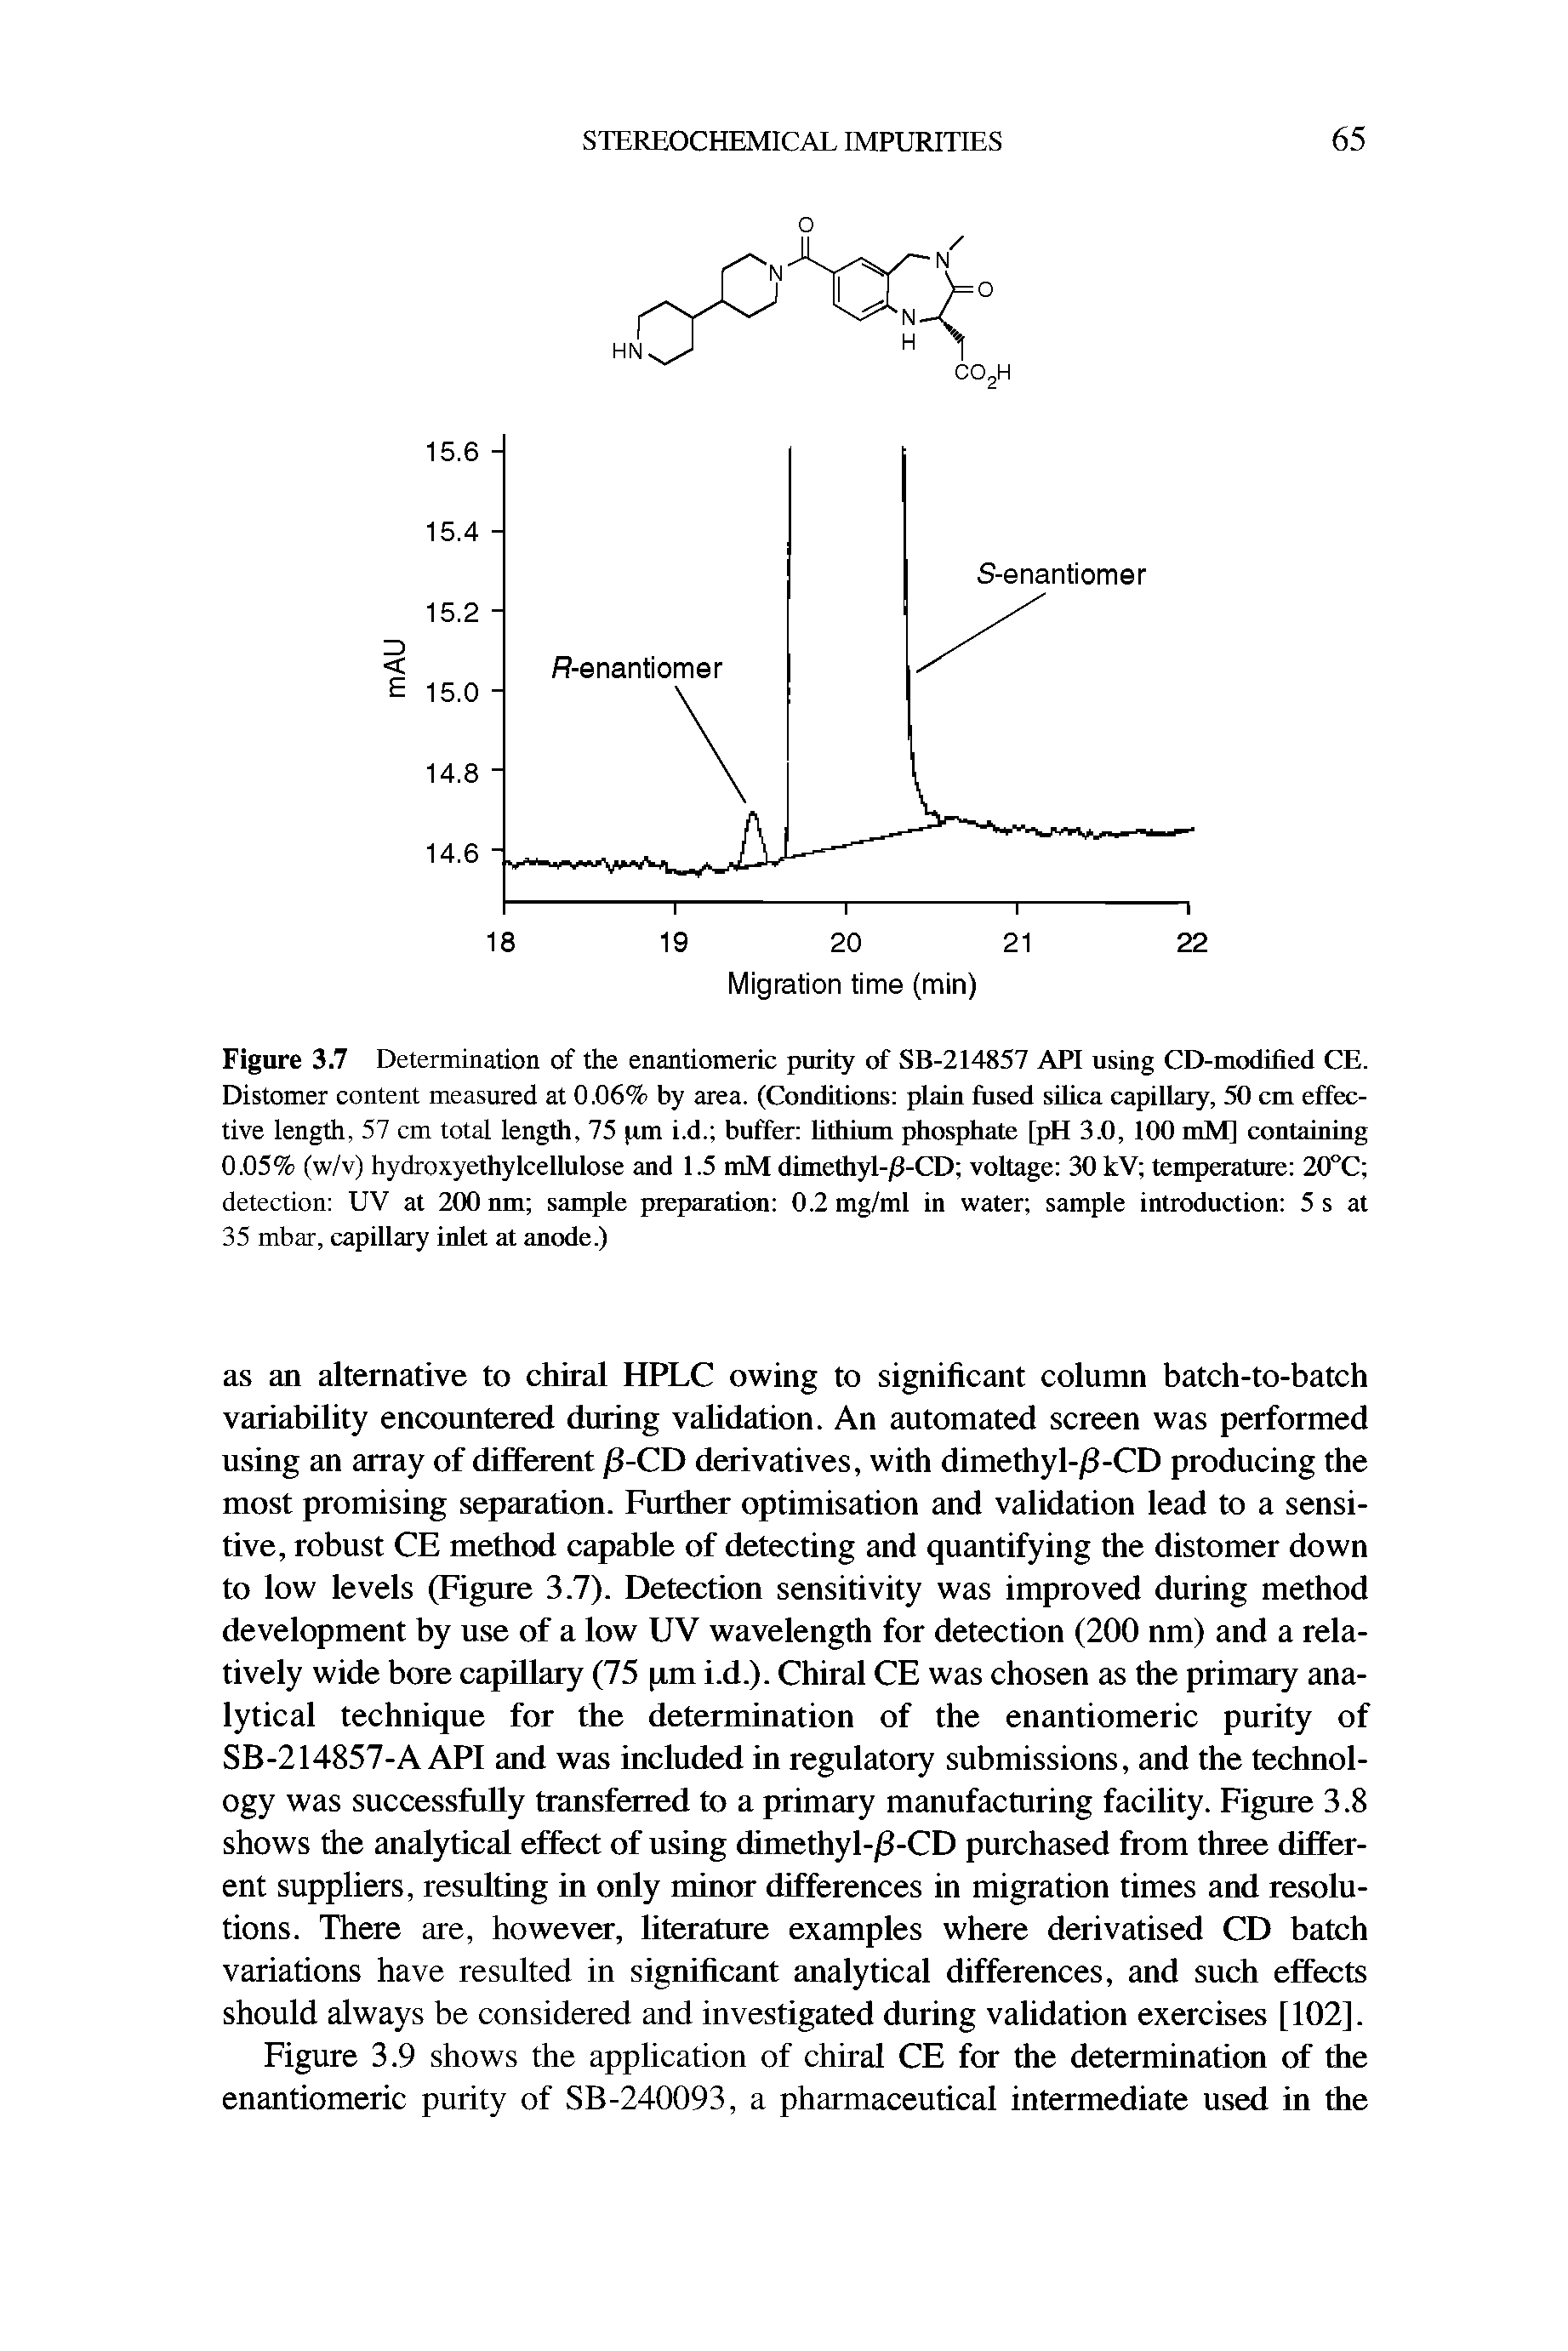 Figure 3.7 Determination of the enantiomeric purity of SB-214857 API using CD-modified CE. Distomer content measured at 0.06% by area. (Conditions plain fused silica capillary, 50 cm effective length, 57 cm total length, 75 pm i.d. buffer lithium phosphate [pH 3.0, 100 mM] containing 0.05% (w/v) hydroxyethy[cellulose and 1.5 mM dimethyl- 8-CD voltage 30 kV temperature 20°C detection UV at 200 nm sample preparation 0.2 mg/ml in water sample introduction 5 s at 35 mbar, capillary inlet at anode.)...